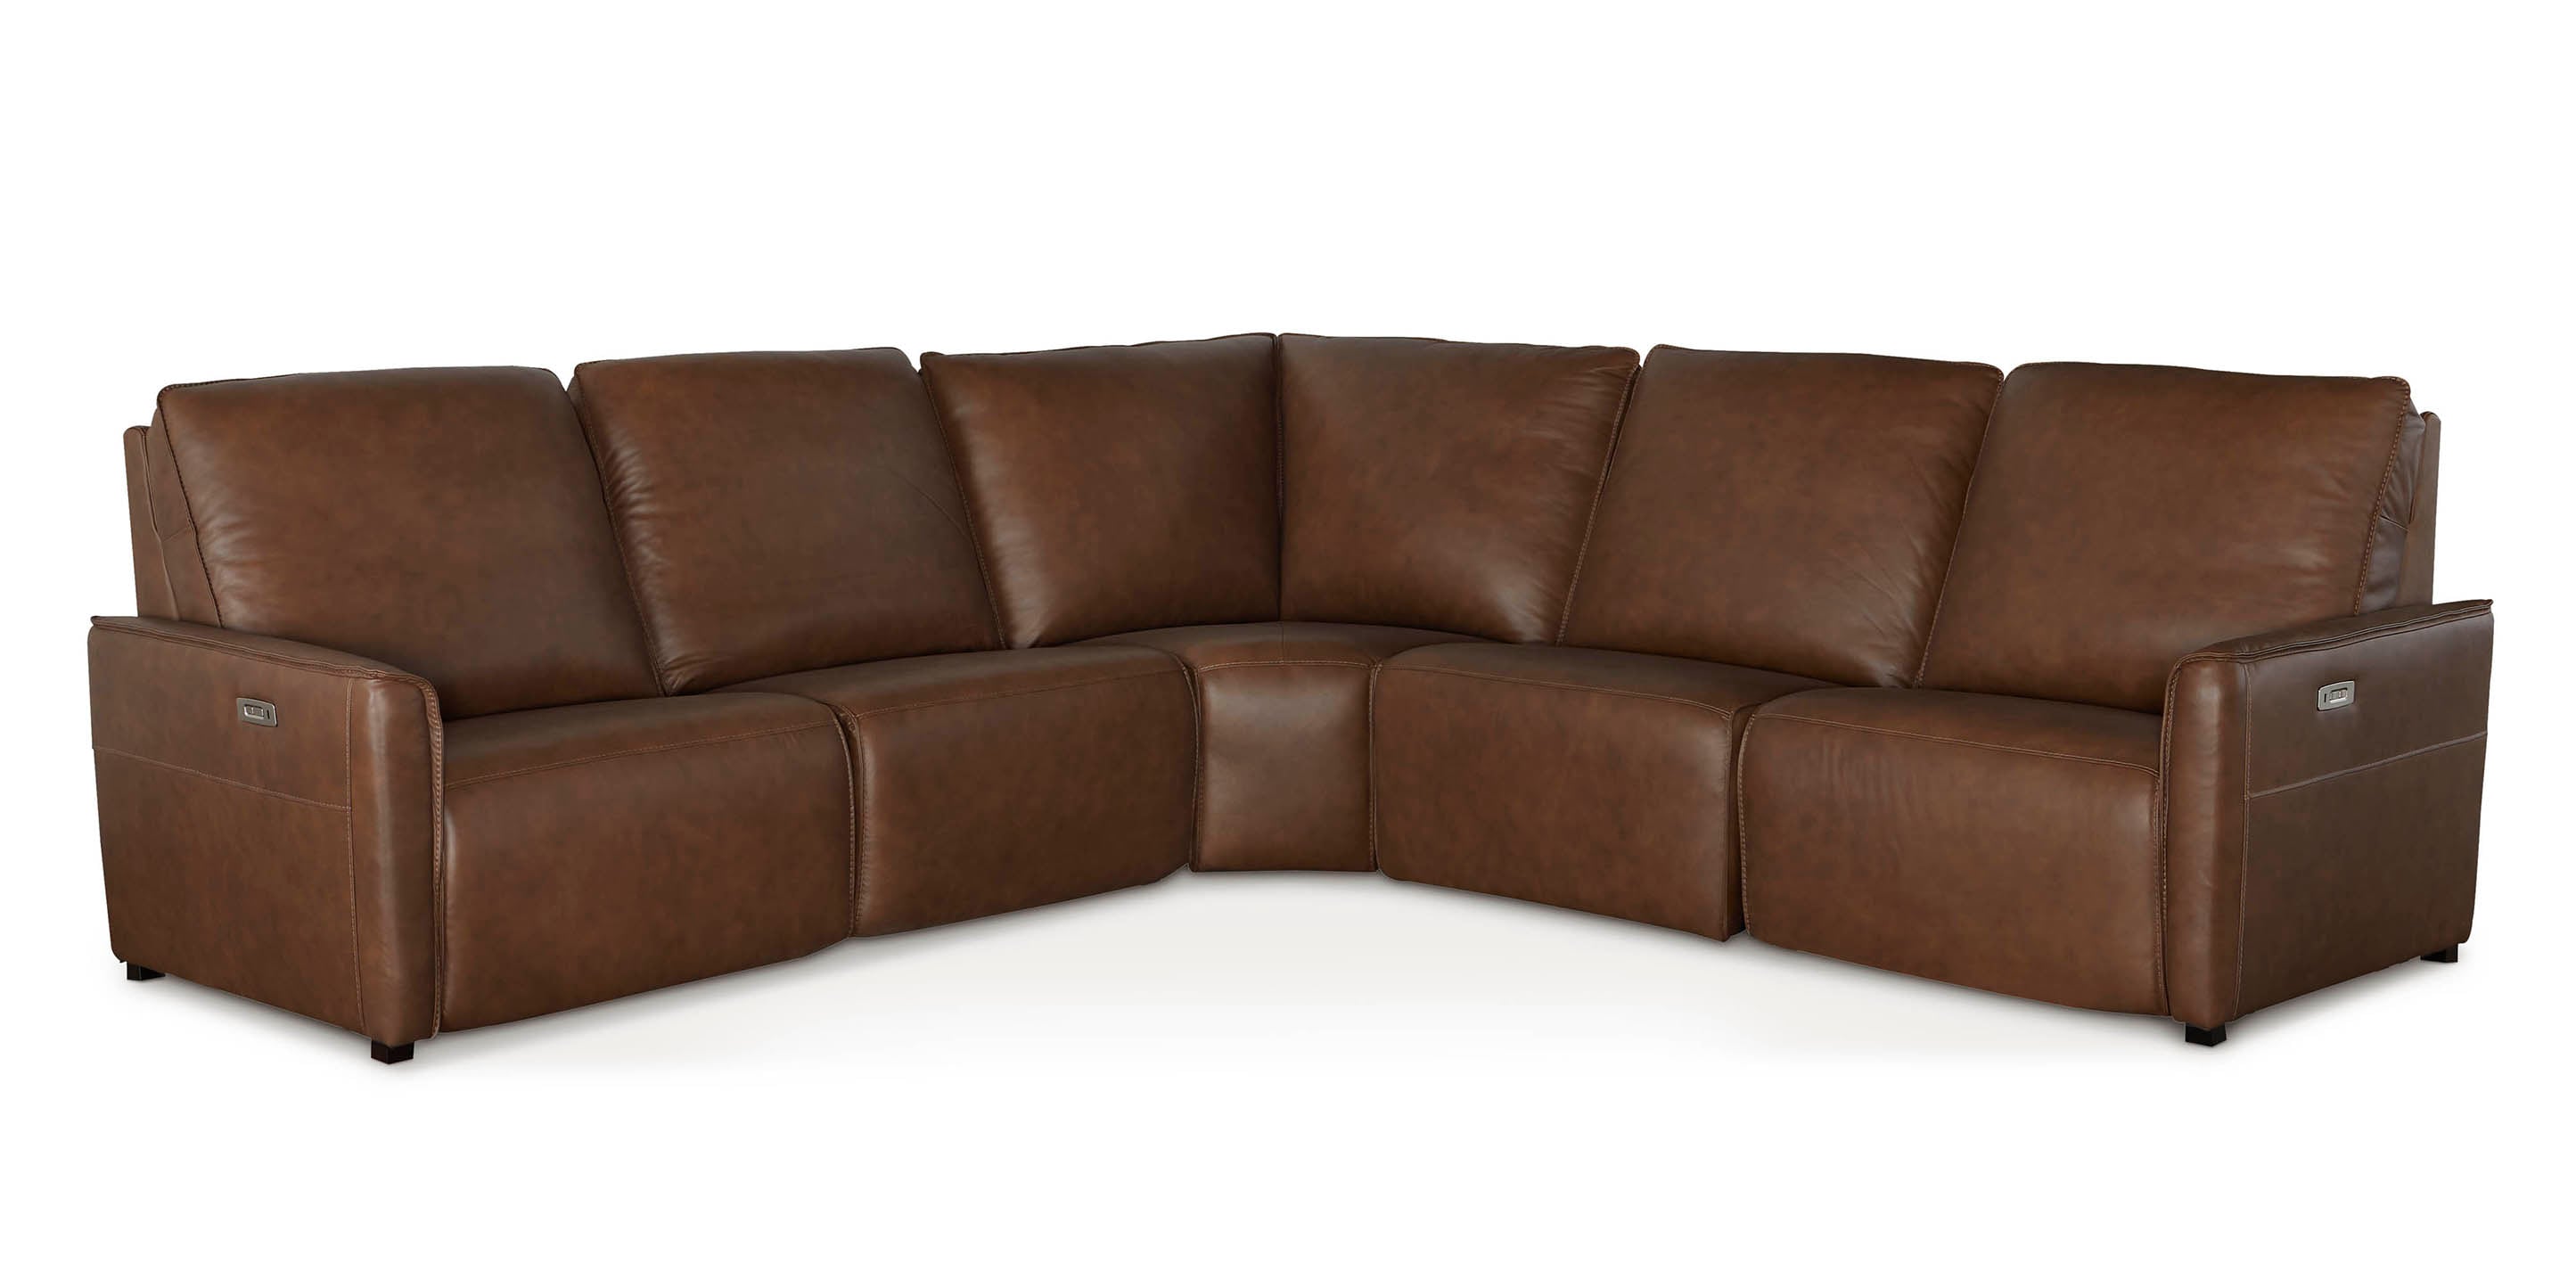 Everett Leather Reclining Sectional